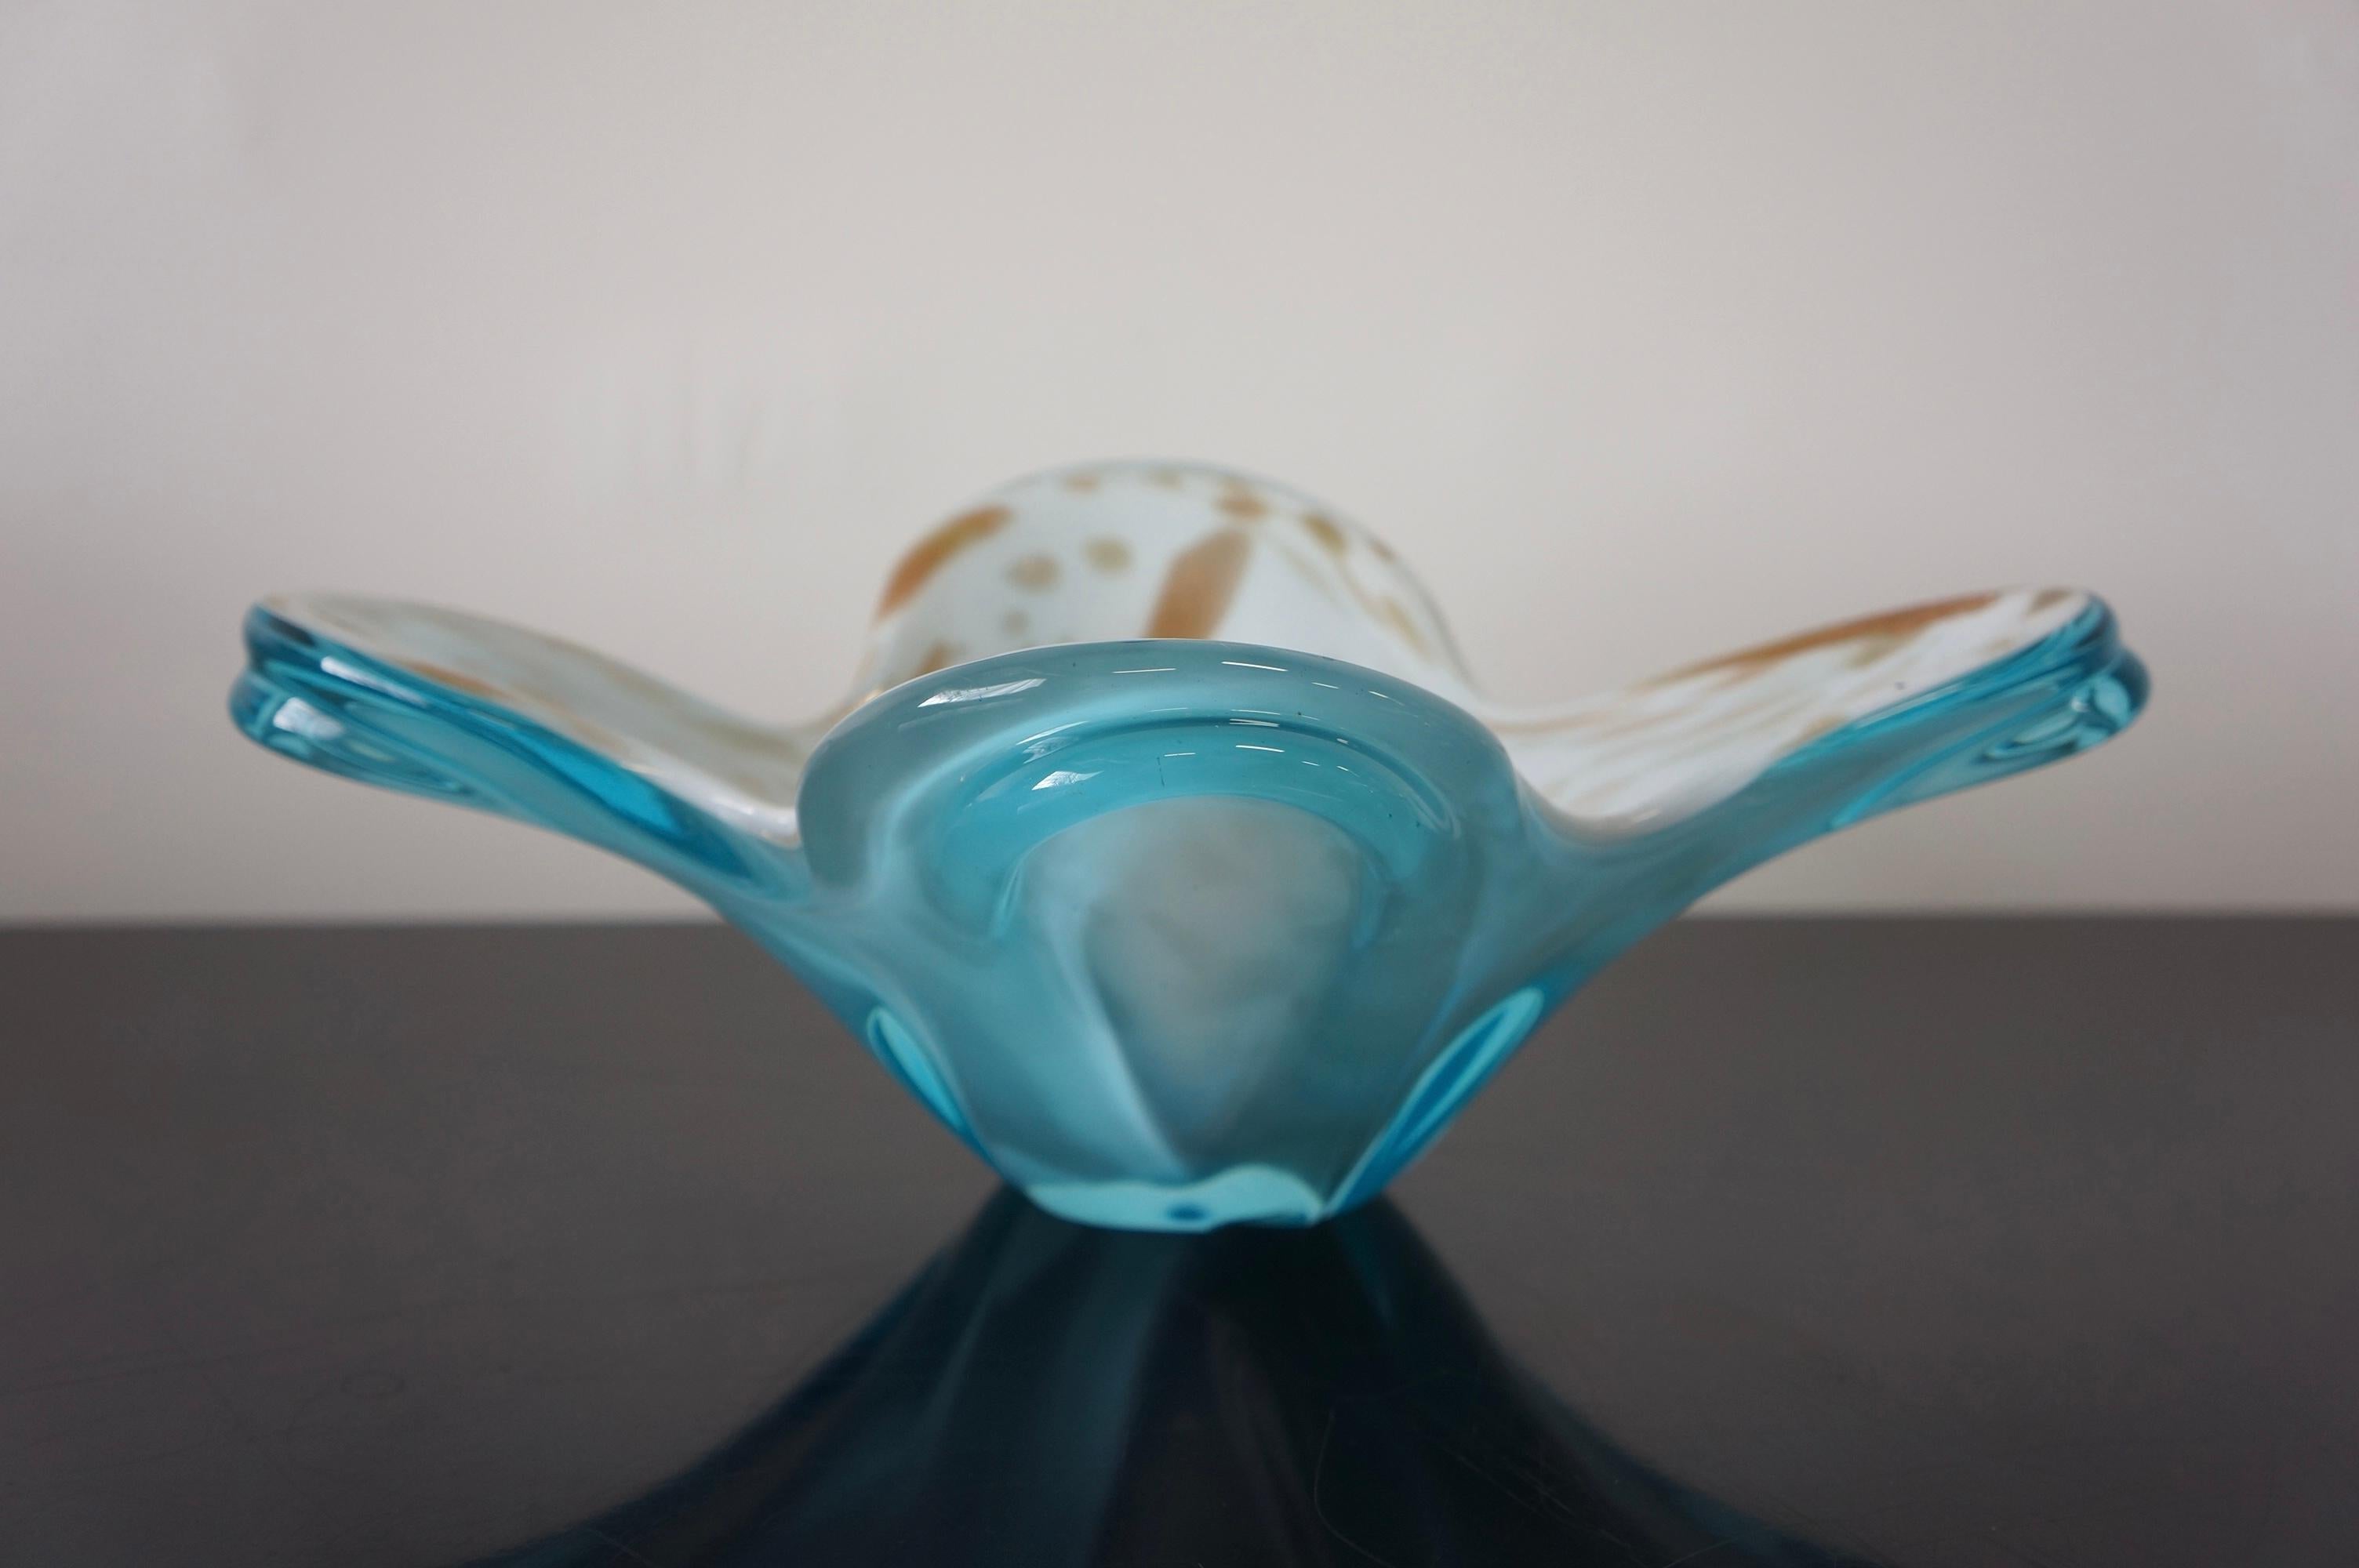 Stunning Murano Art glass decorative bowl in Blue, white, and gold speckle. It is three toned and made with layered glass. Featuring aqua blue glass at the bottom, white glass on top, and gold speckled spots. The vibrant tones make it such an eye